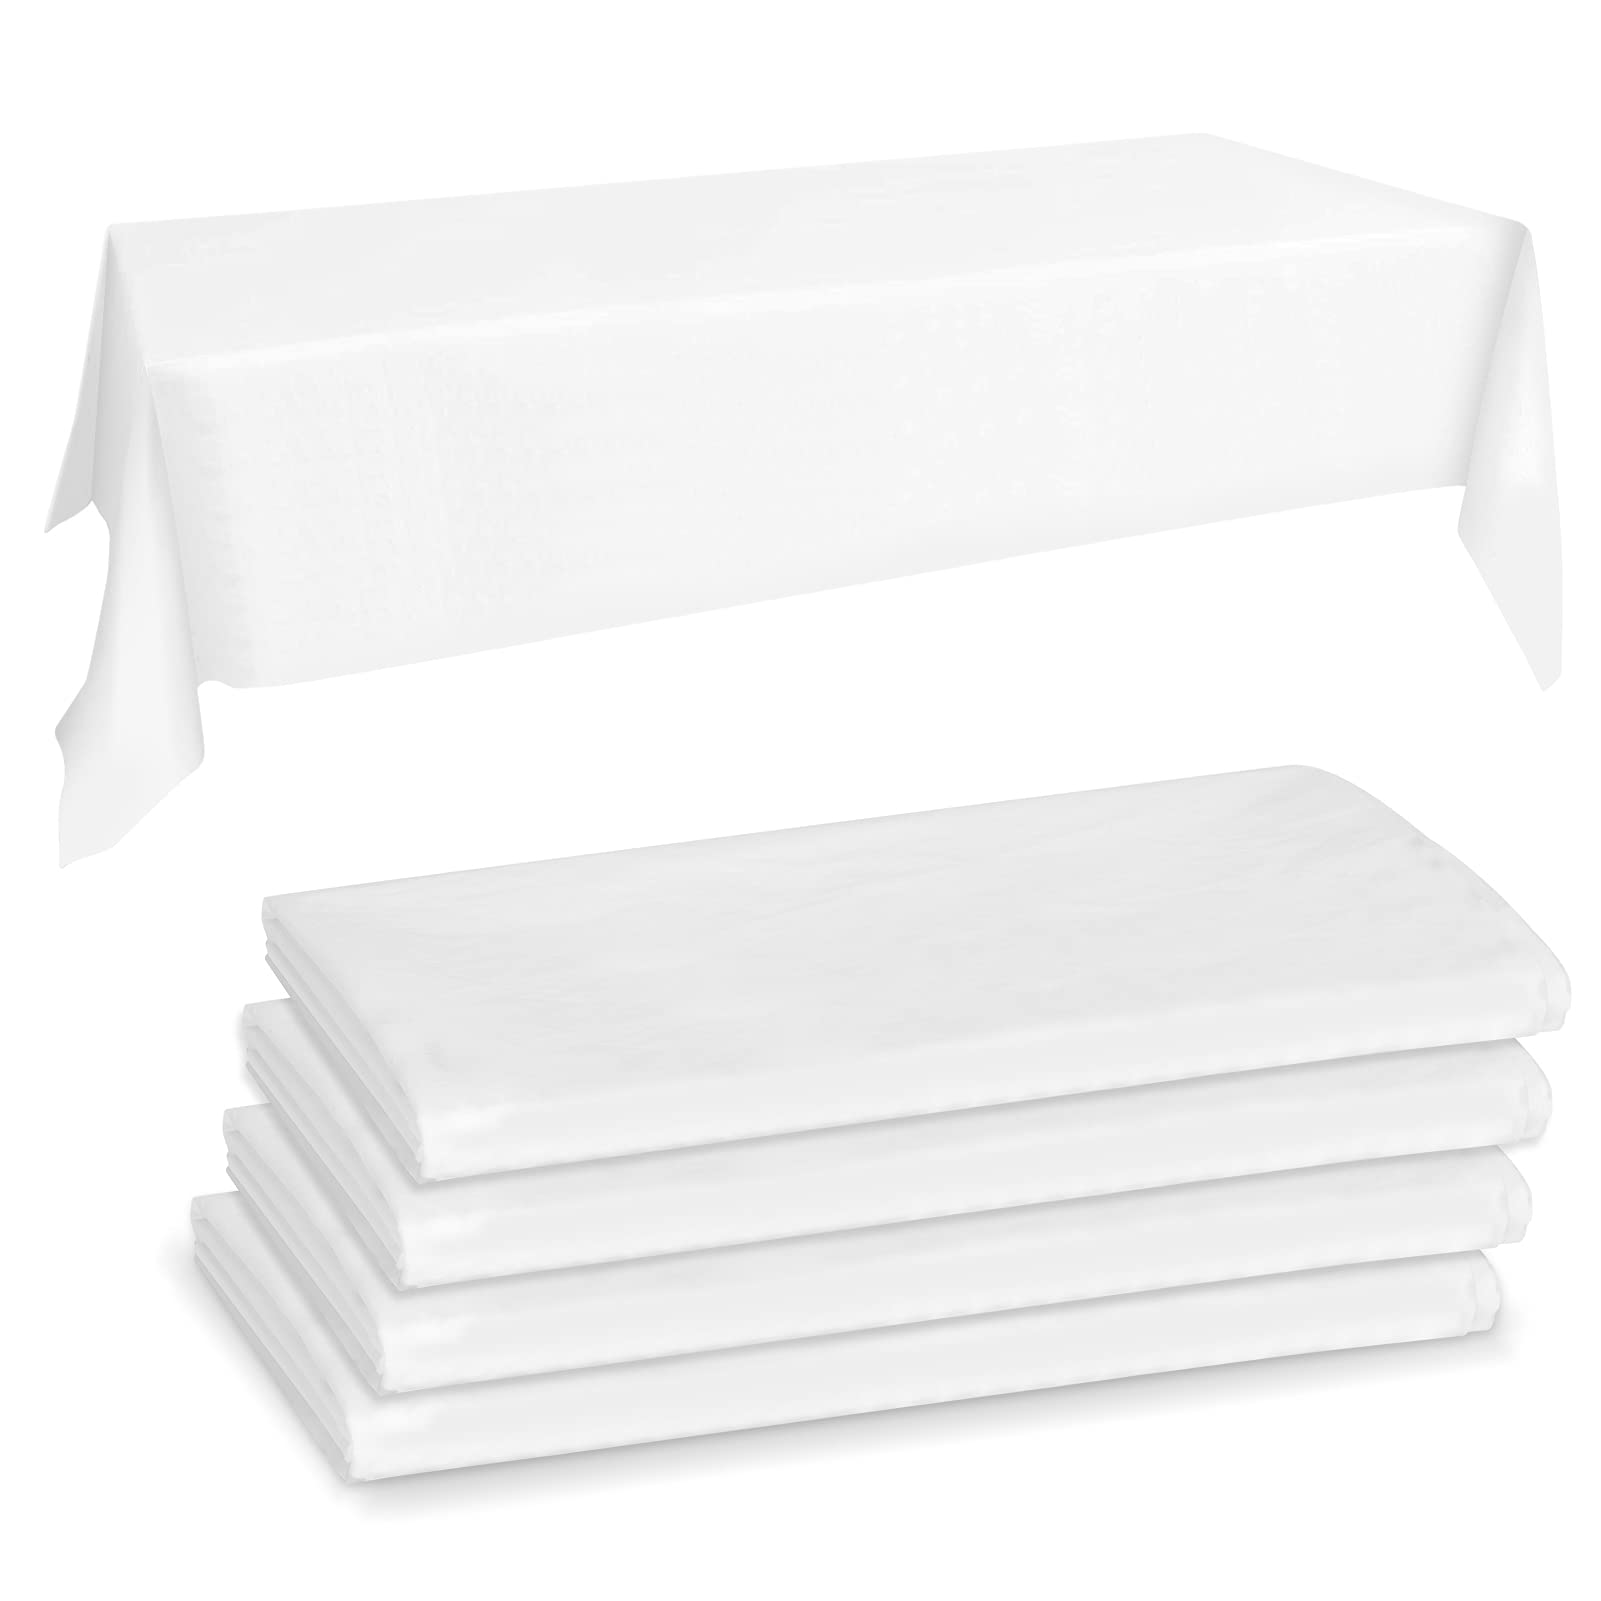 FYY 4 PCS Disposable Plastic Tablecloths, Plastic Rectangle Pure White Tablecloths for Indoor or Outdoor Tables Parties Christmas Picnic Birthdays and Weddings